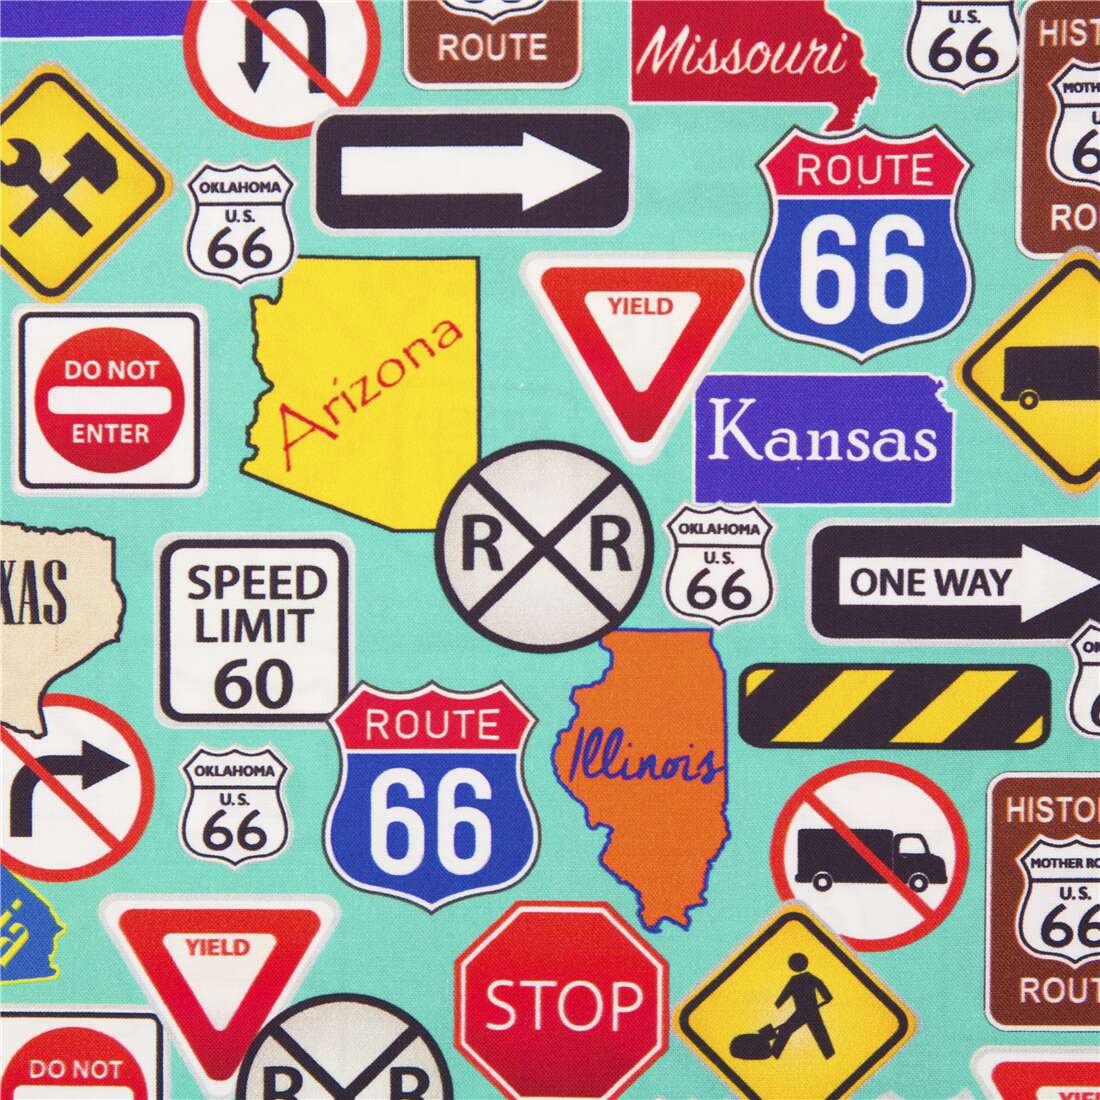 om forladelse Ordinere emne Route 66 Colorful Road Signage Fabric by Quilting Treasures - modeS4u